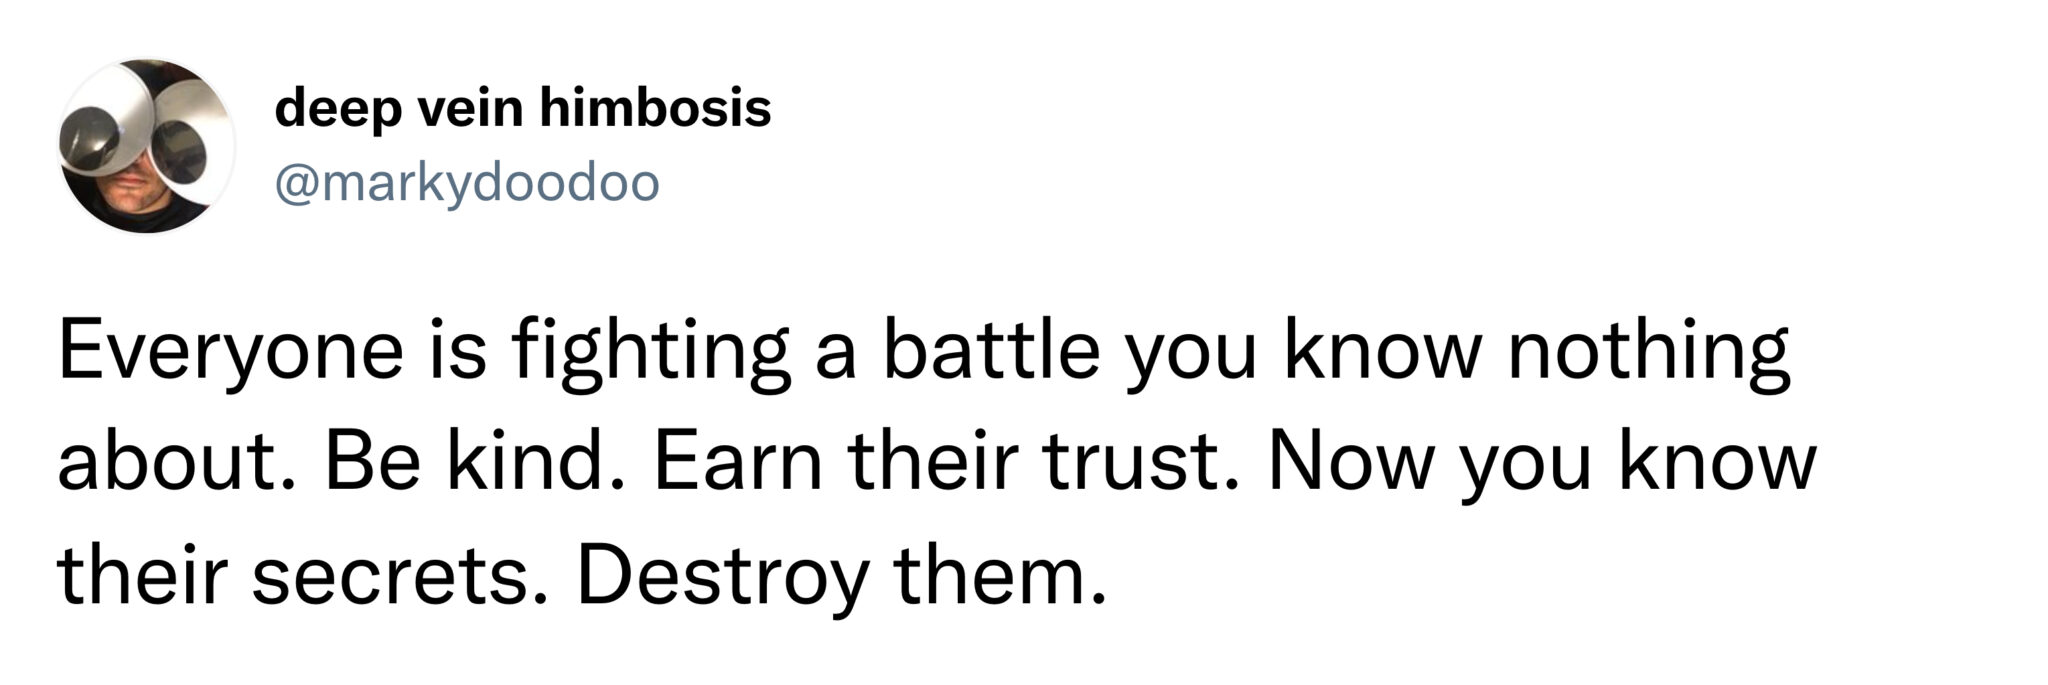 funny tweets and memes -  2022 - deep vein himbosis Everyone is fighting a battle you know nothing about. Be kind. Earn their trust. Now you know their secrets. Destroy them.